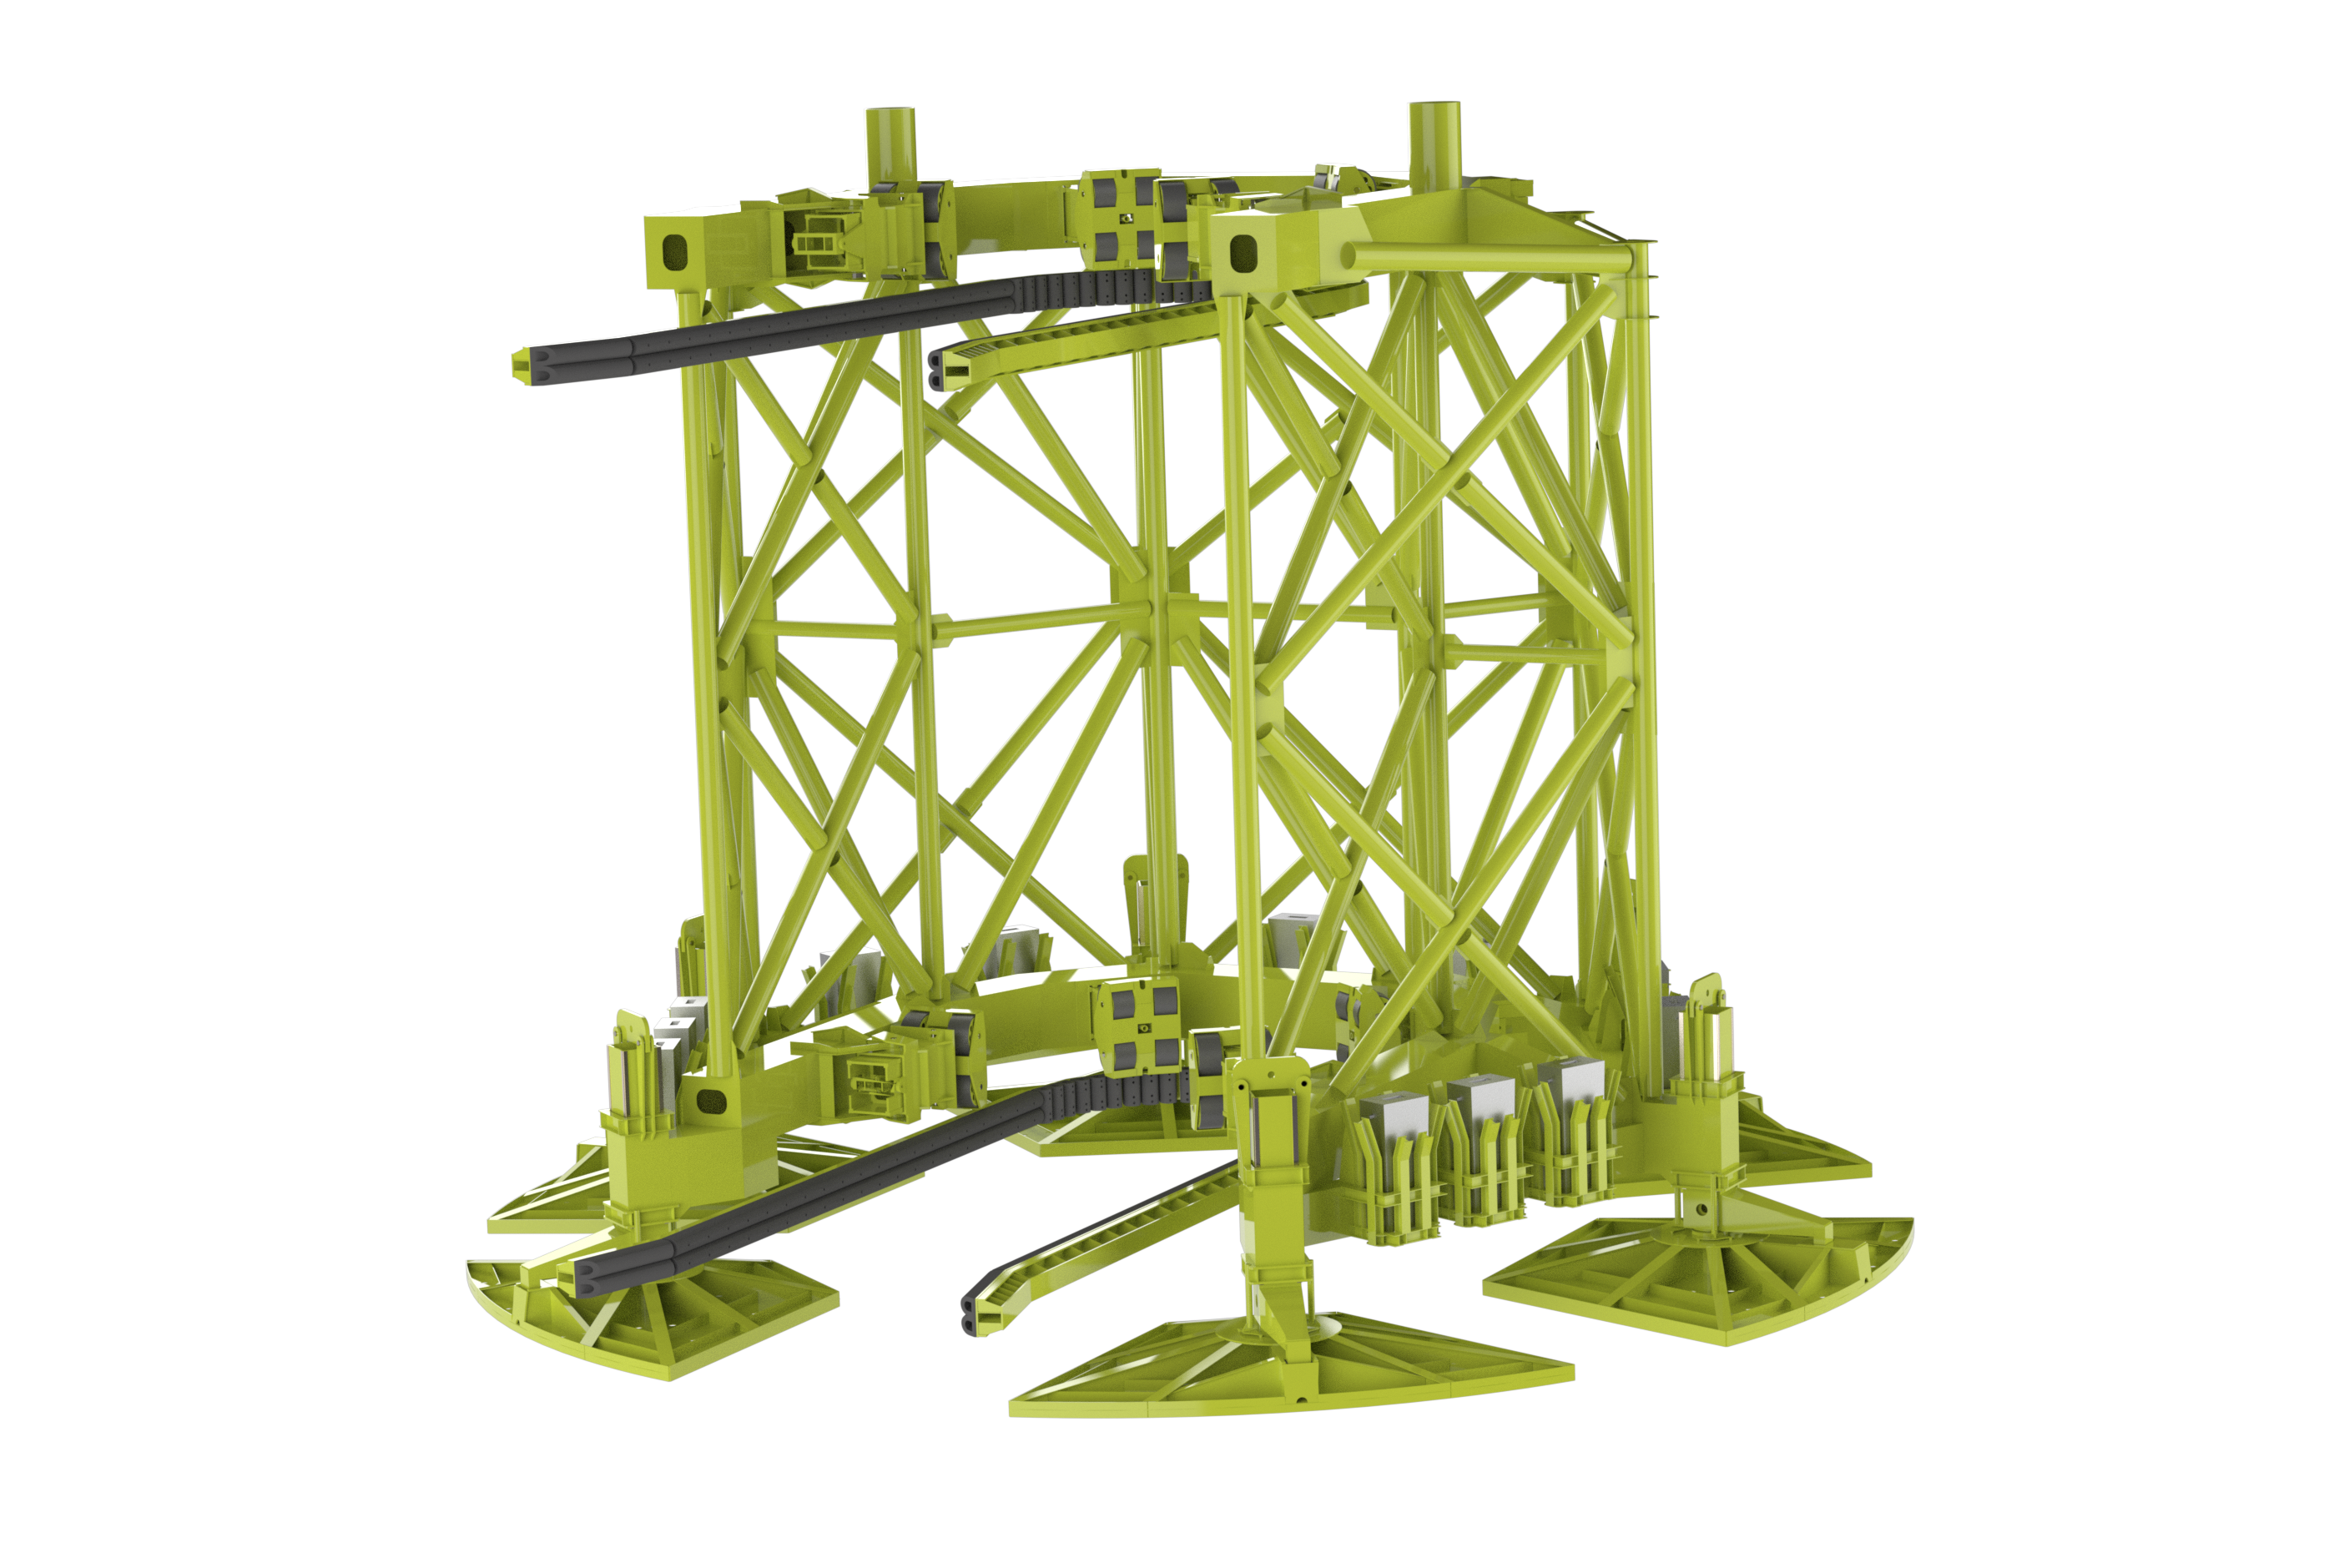 The purpose of the Piling Template is to aid in the installation of the foundation piles for offshore wind turbines. 